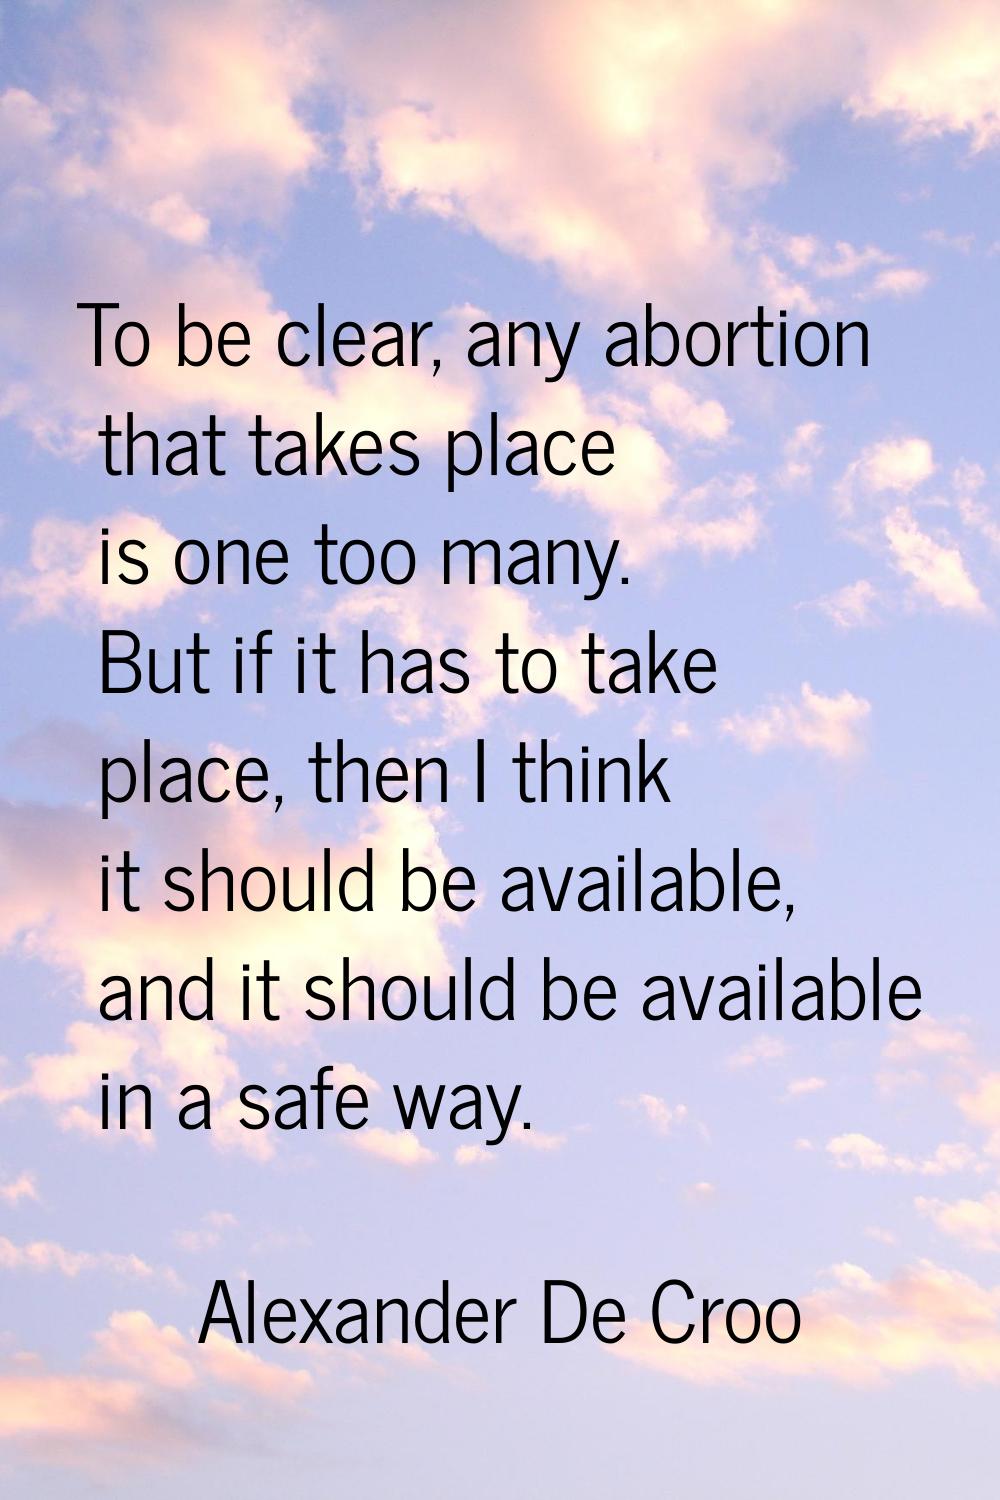 To be clear, any abortion that takes place is one too many. But if it has to take place, then I thi